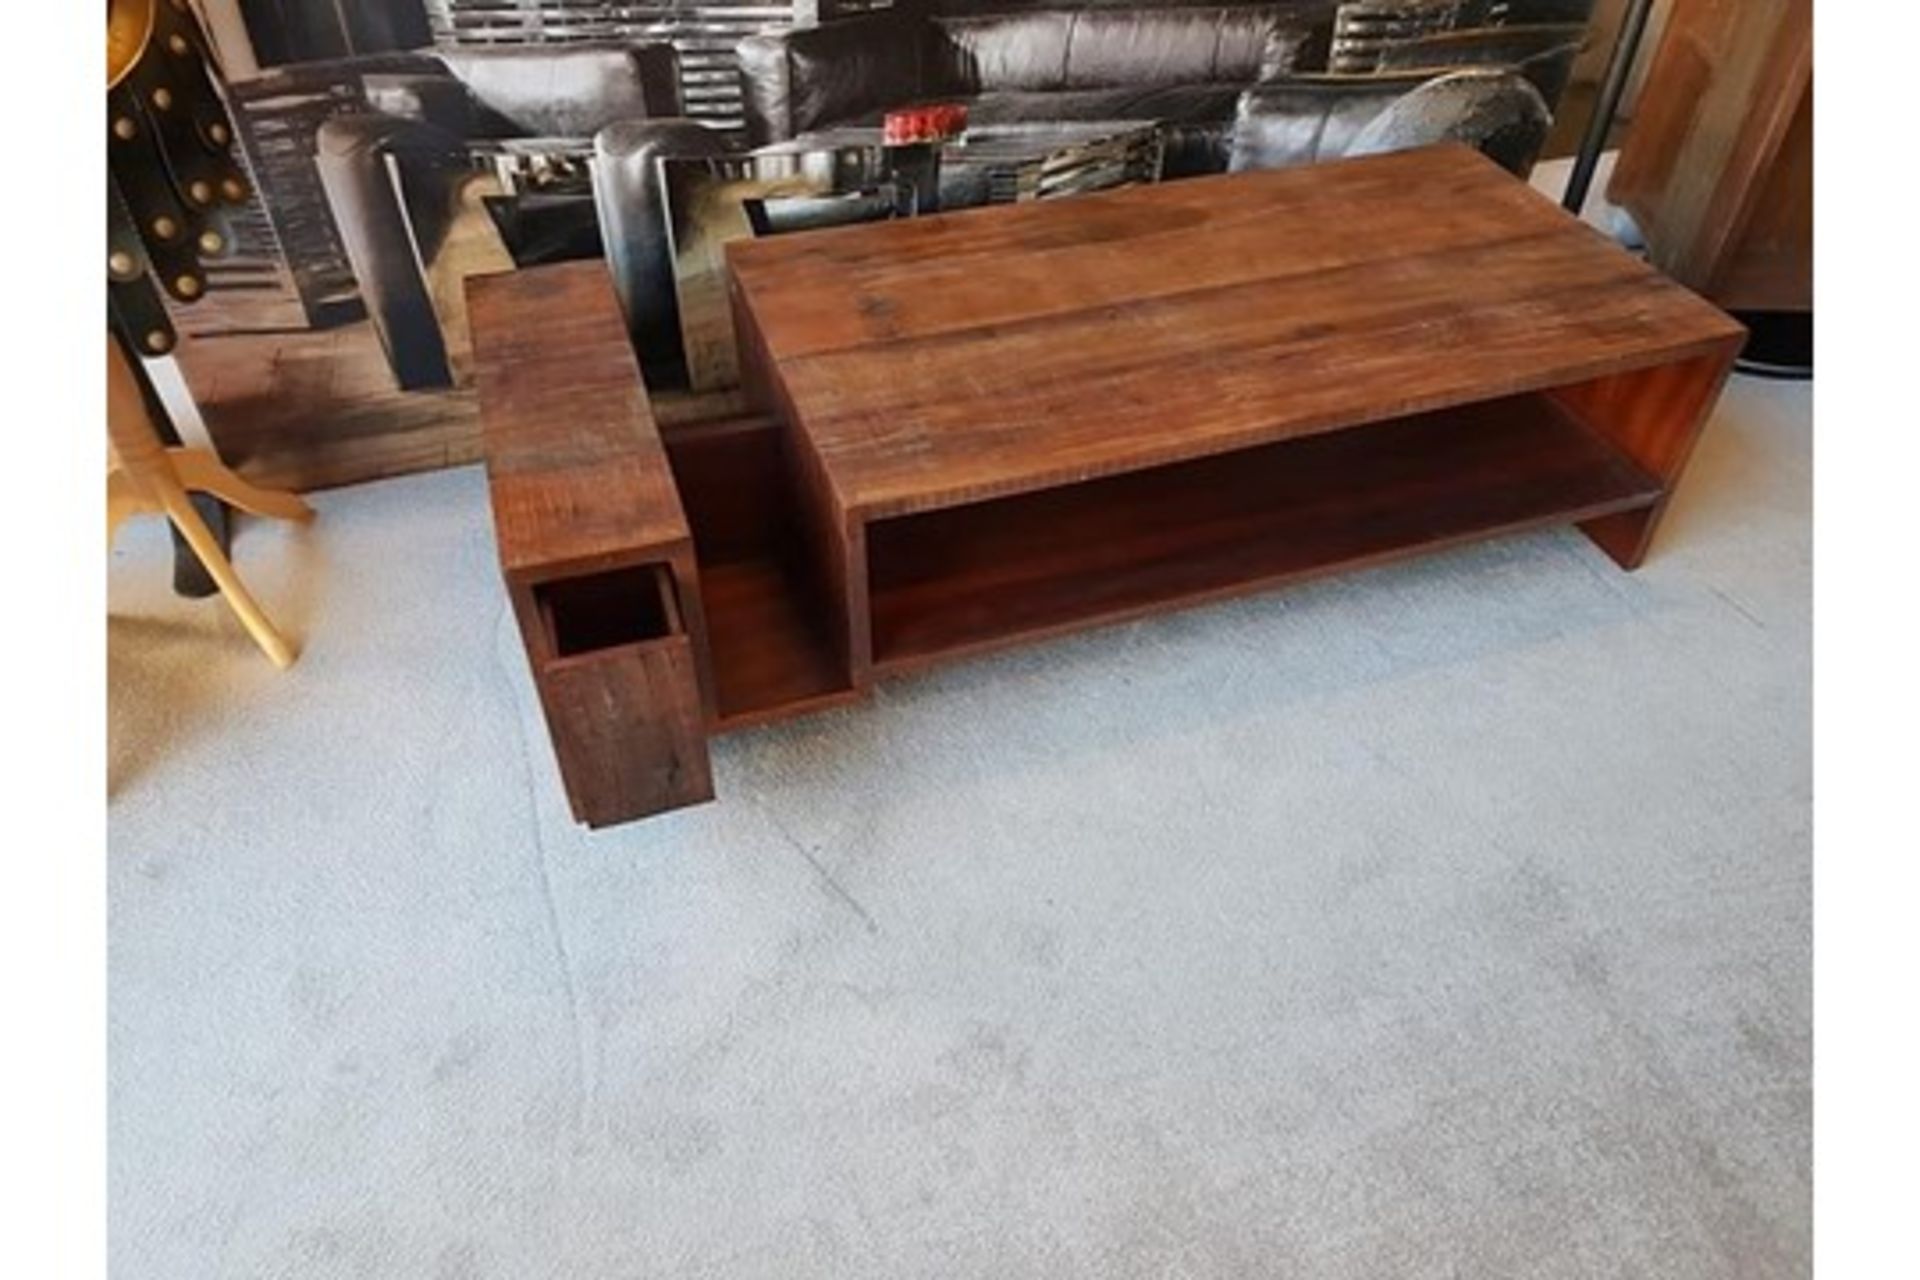 Coffee Table - Avett Coffee Table Hand-Crafted From Exotic Demolition Hardwoods The Avett Coffee